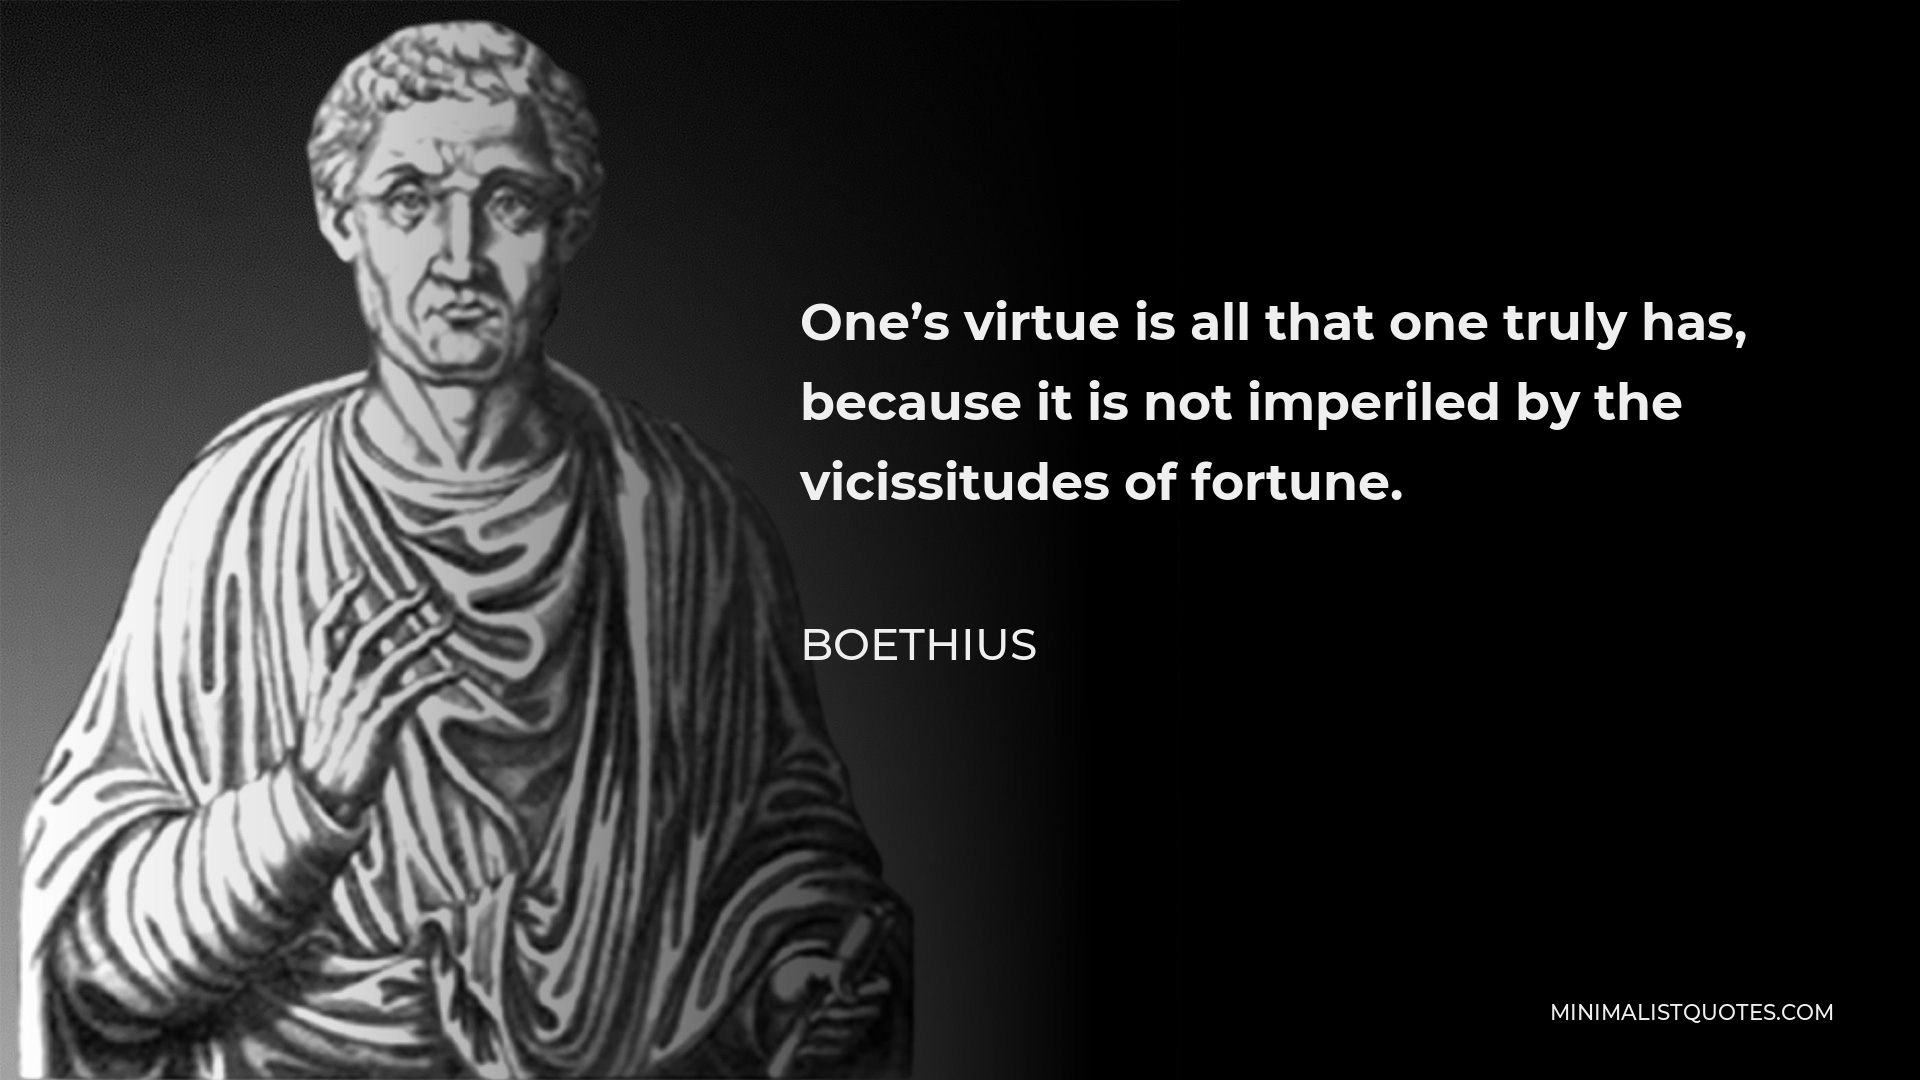 Boethius Quote - One’s virtue is all that one truly has, because it is not imperiled by the vicissitudes of fortune.